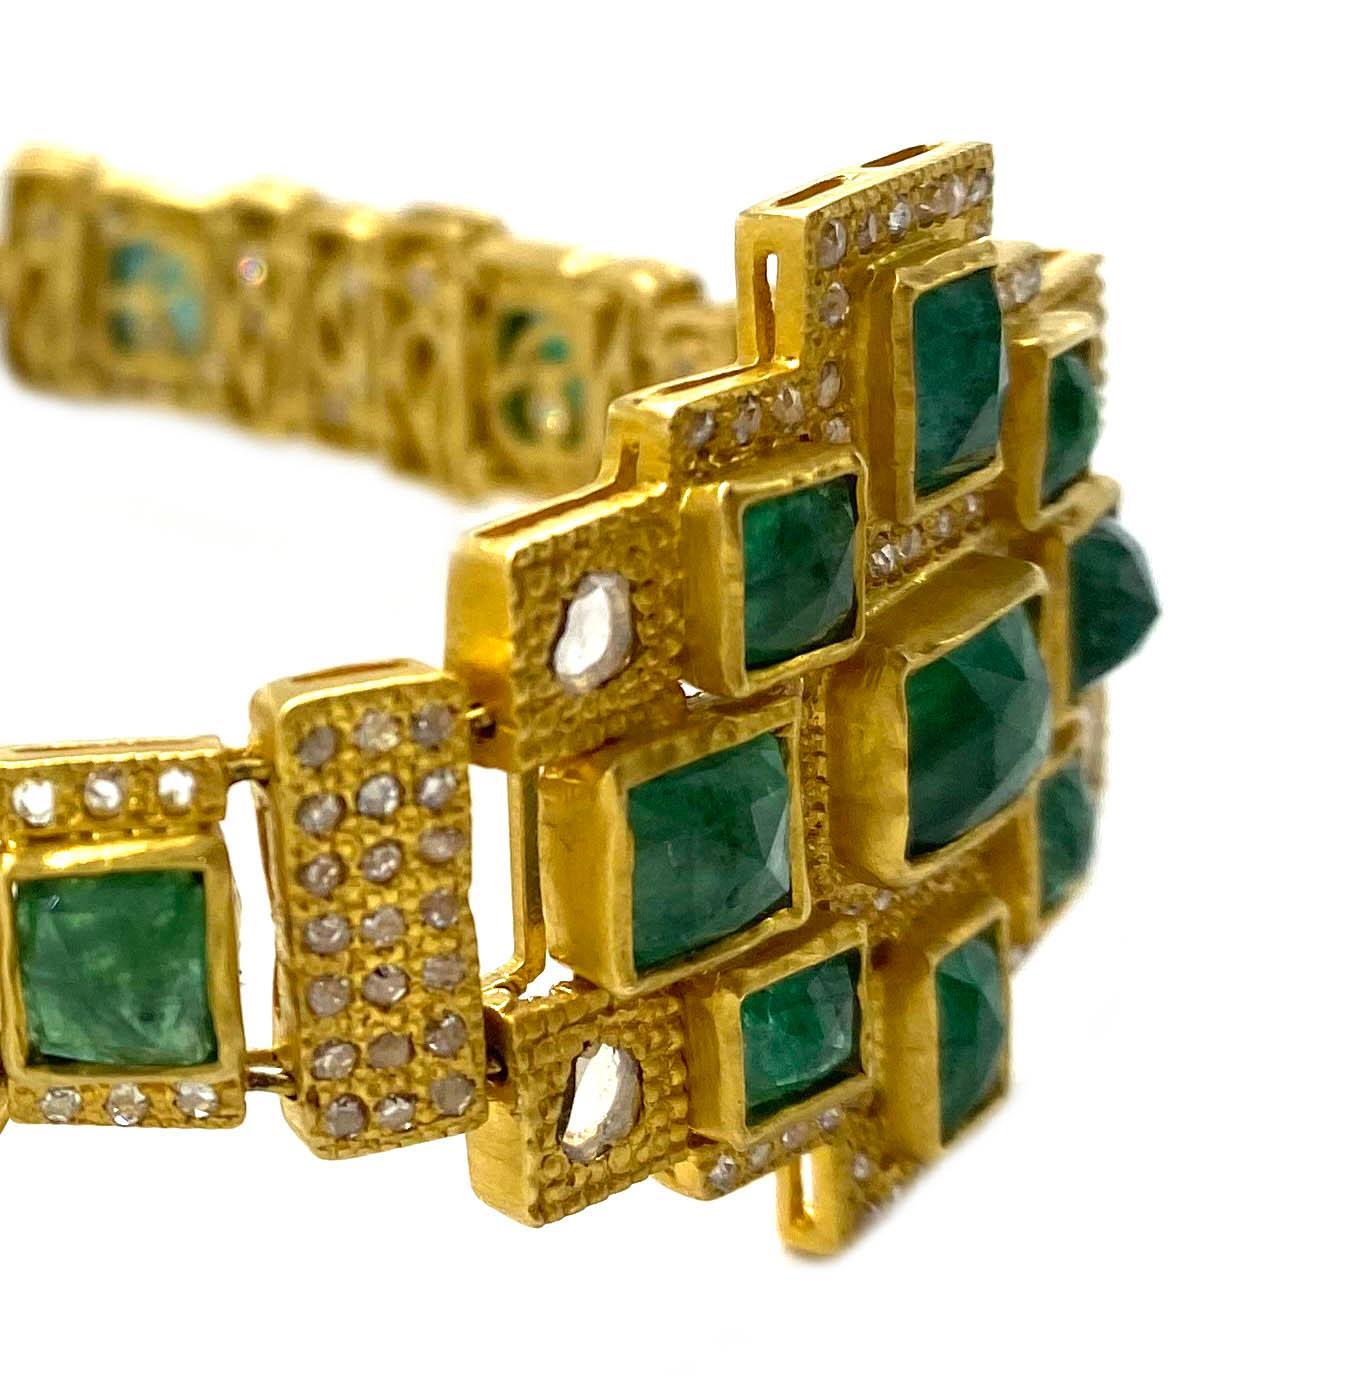 Stunning Art Deco Style Mosaic Bracelet set in 20 karat Yellow Gold with 10.05cts Emeralds and Diamonds at 2.58cts, brought to you from the Luminosity collection, which consists of bold design and reflects light from within. Coomi chooses each